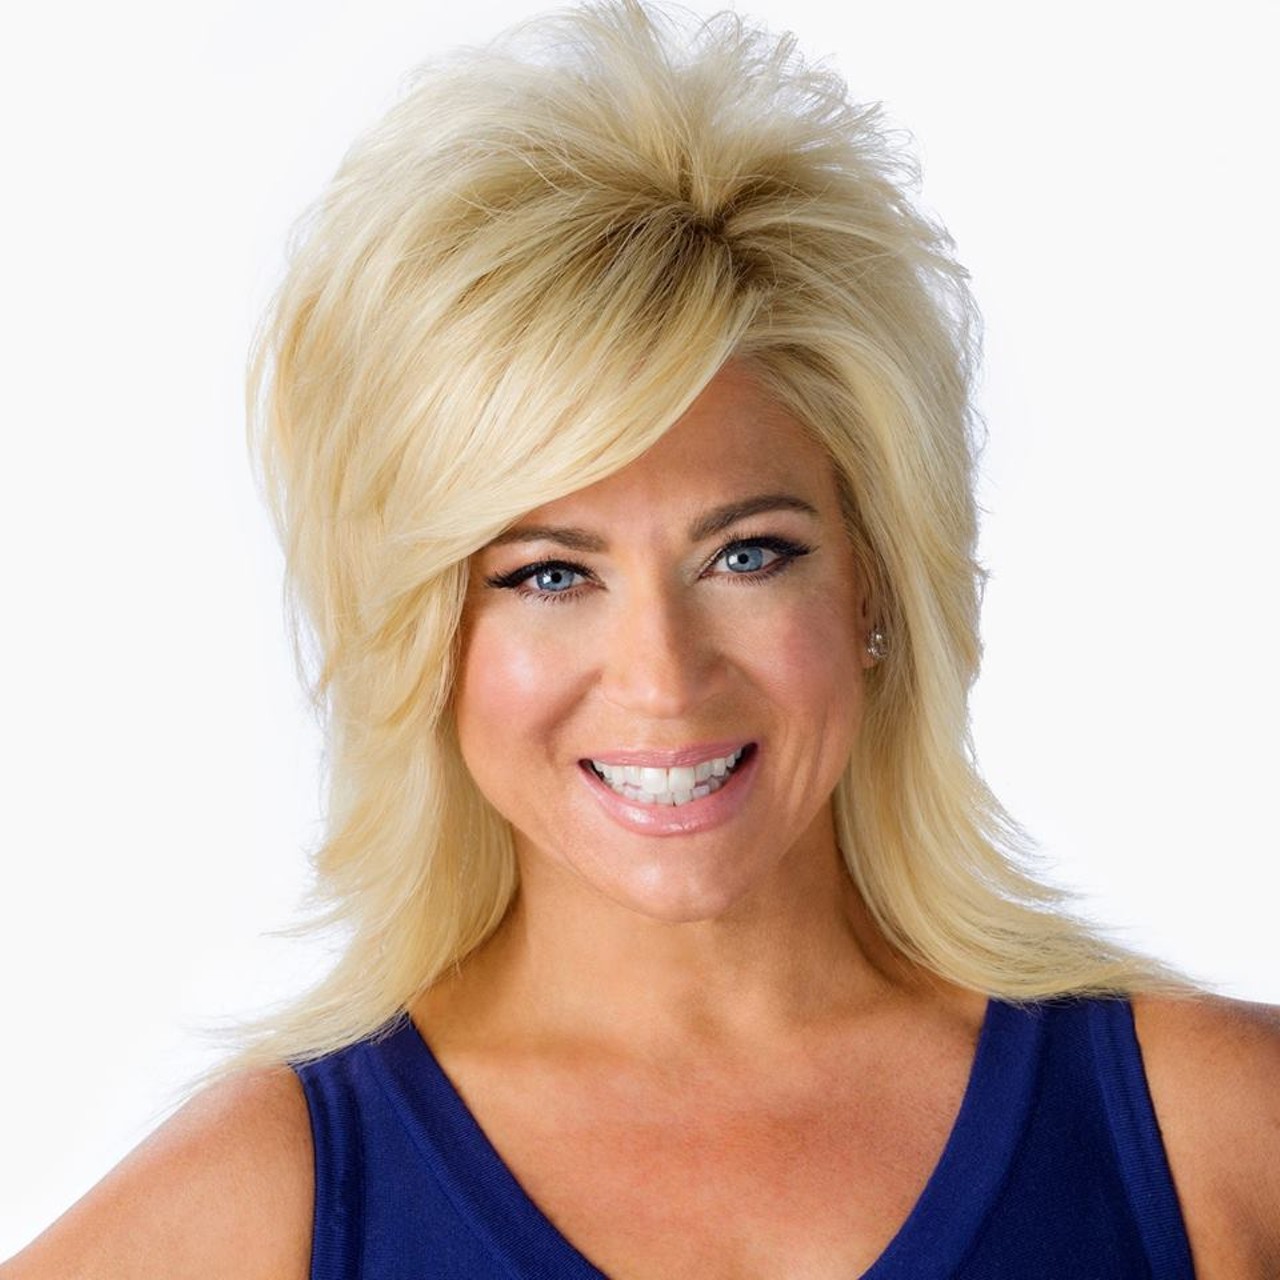 Sunday, 1/22
Theresa Caputo
@ Sound Board
You might know this uniquely coiffed East Coaster as the Long Island Medium, which is the same name as her TLC reality show series. Caputo channels the spirits of those who have died and connects them to their living loved ones. During this appearance at Motor City Casino&#146;s Sound Board, she&#146;ll talk about her life as a medium before doing some spirit channeling with the audience. We suggest bringing tissues. 
Show starts at 7:30 p.m.; 2901 Grand River Ave., Detroit; soundboarddetroit.com; 800-745-3000; tickets are $65-$125.